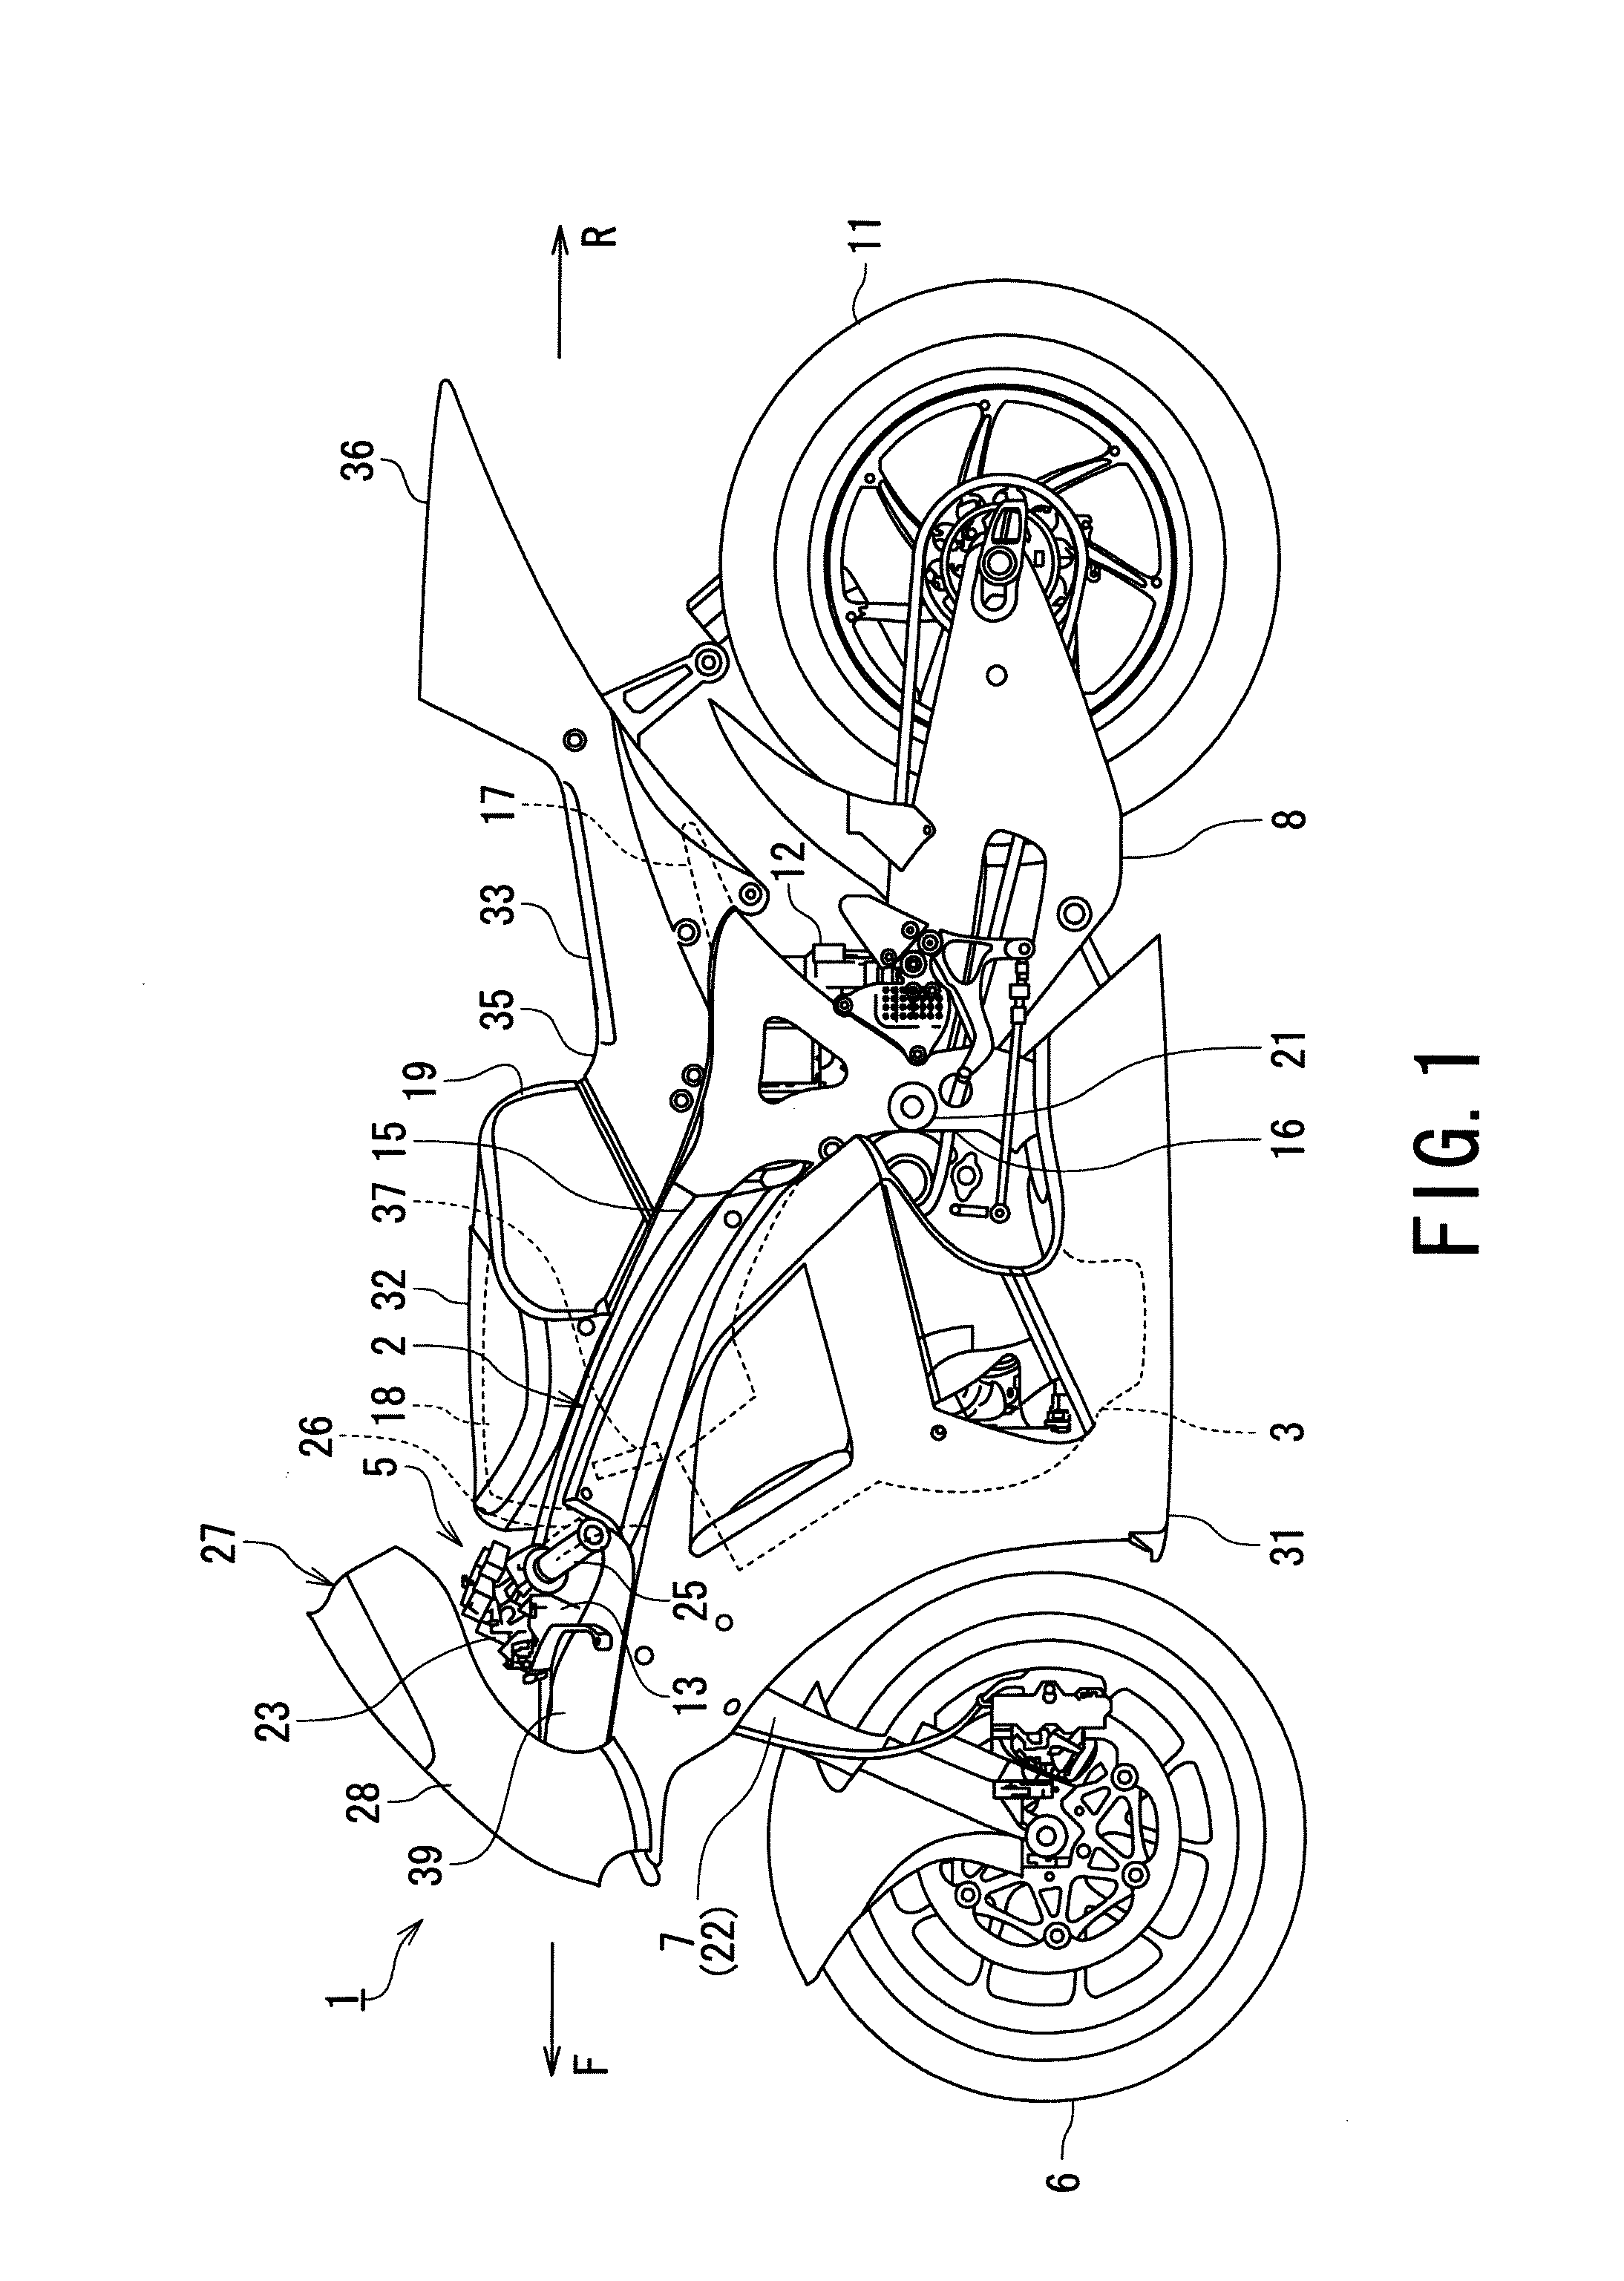 Intake structure of motorcycle